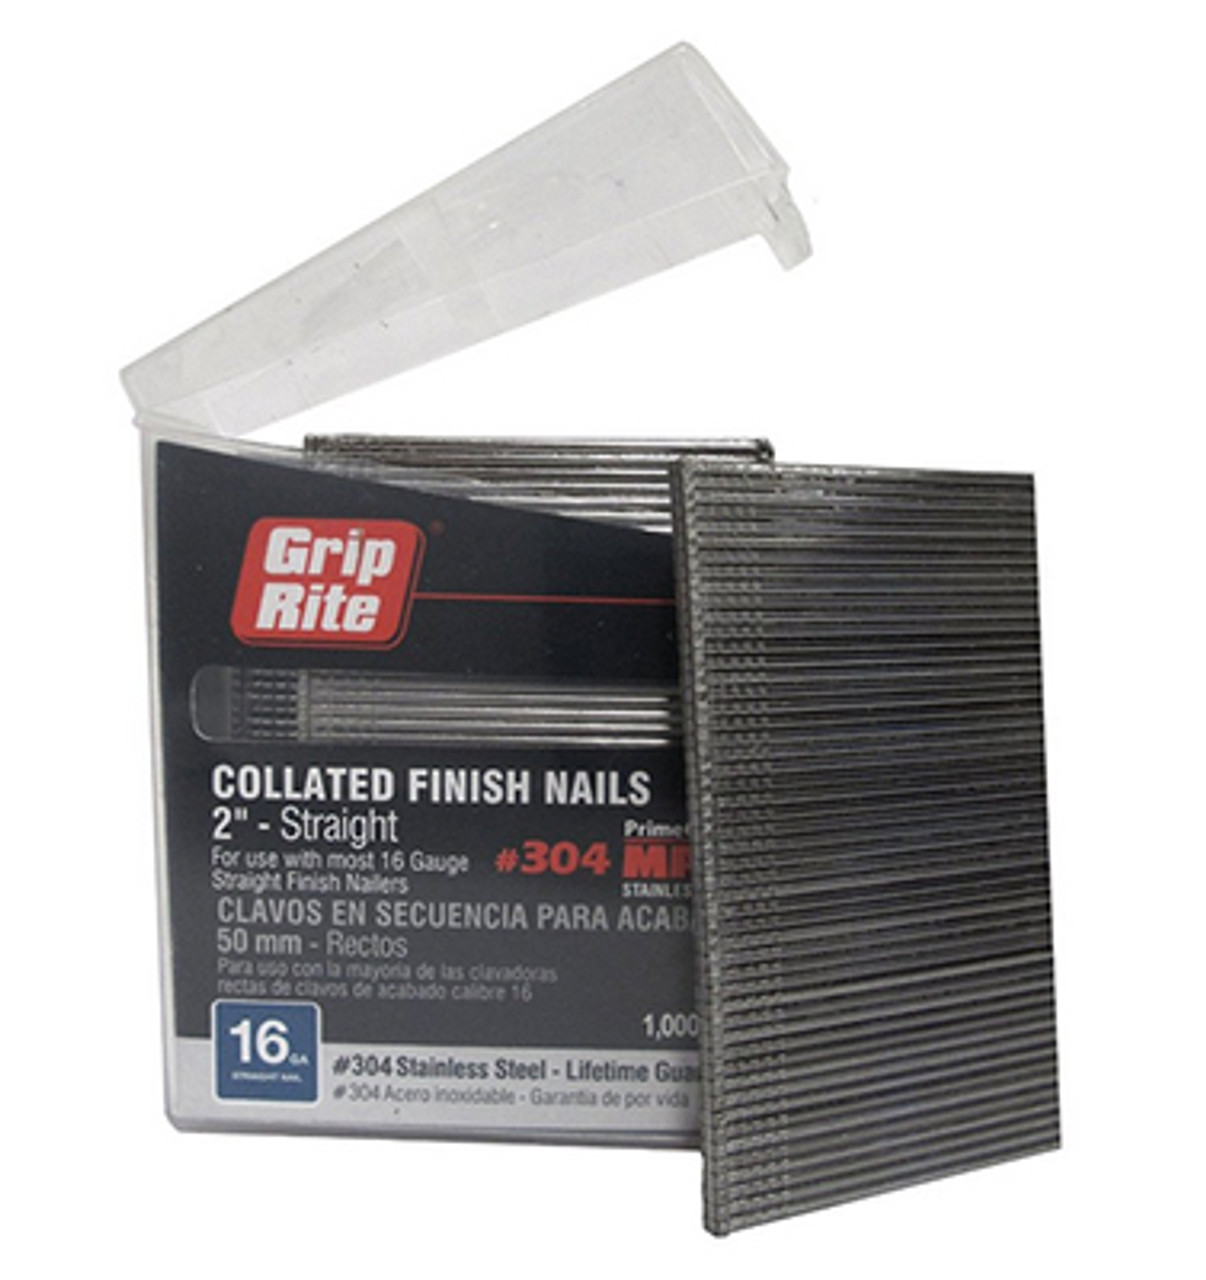 Grip-Rite 1" Collated Straight Finish Nails, 16 Gauge, Electrogalvanized, Smooth Shank, (1,000 Box/5 Boxes)